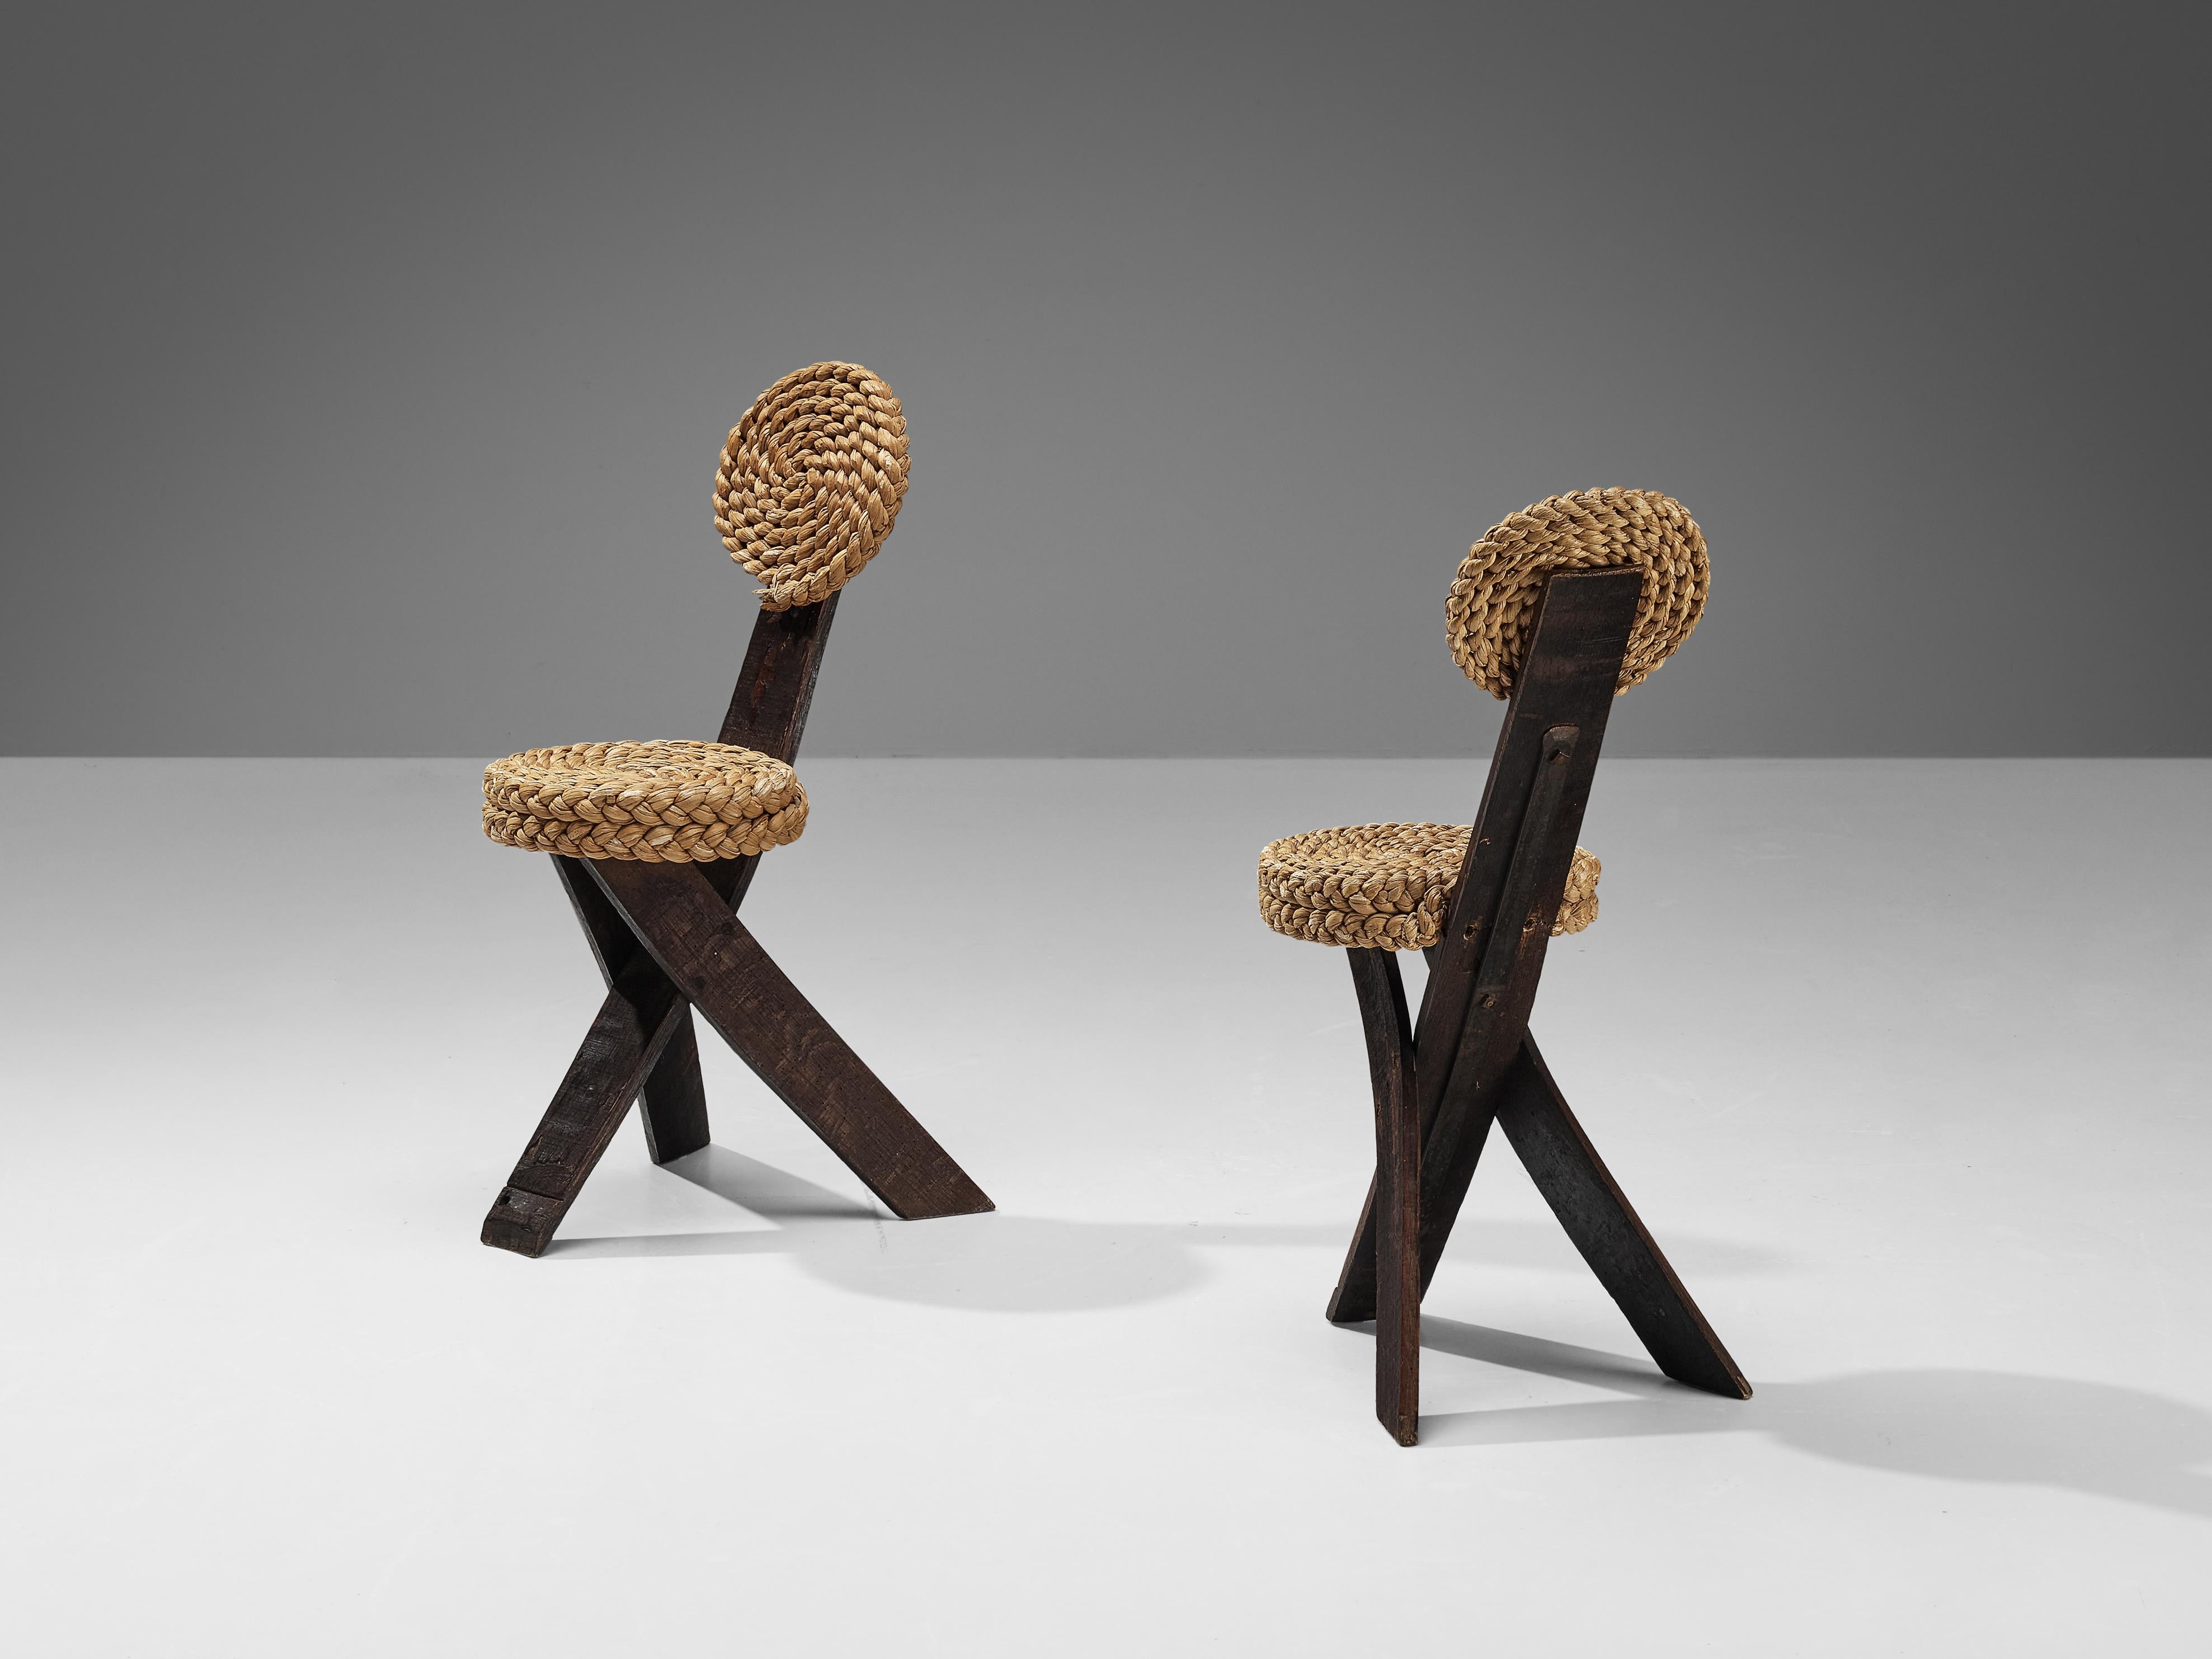 Adrien Audoux and Frida Minet, side chairs, oak, straw, iron, France, 1950s

This sculptural side chair was created by the French designer couple Adrien Audoux and Frida Minet. The three flat legs are made of dark oak. One leg runs upwards and ends